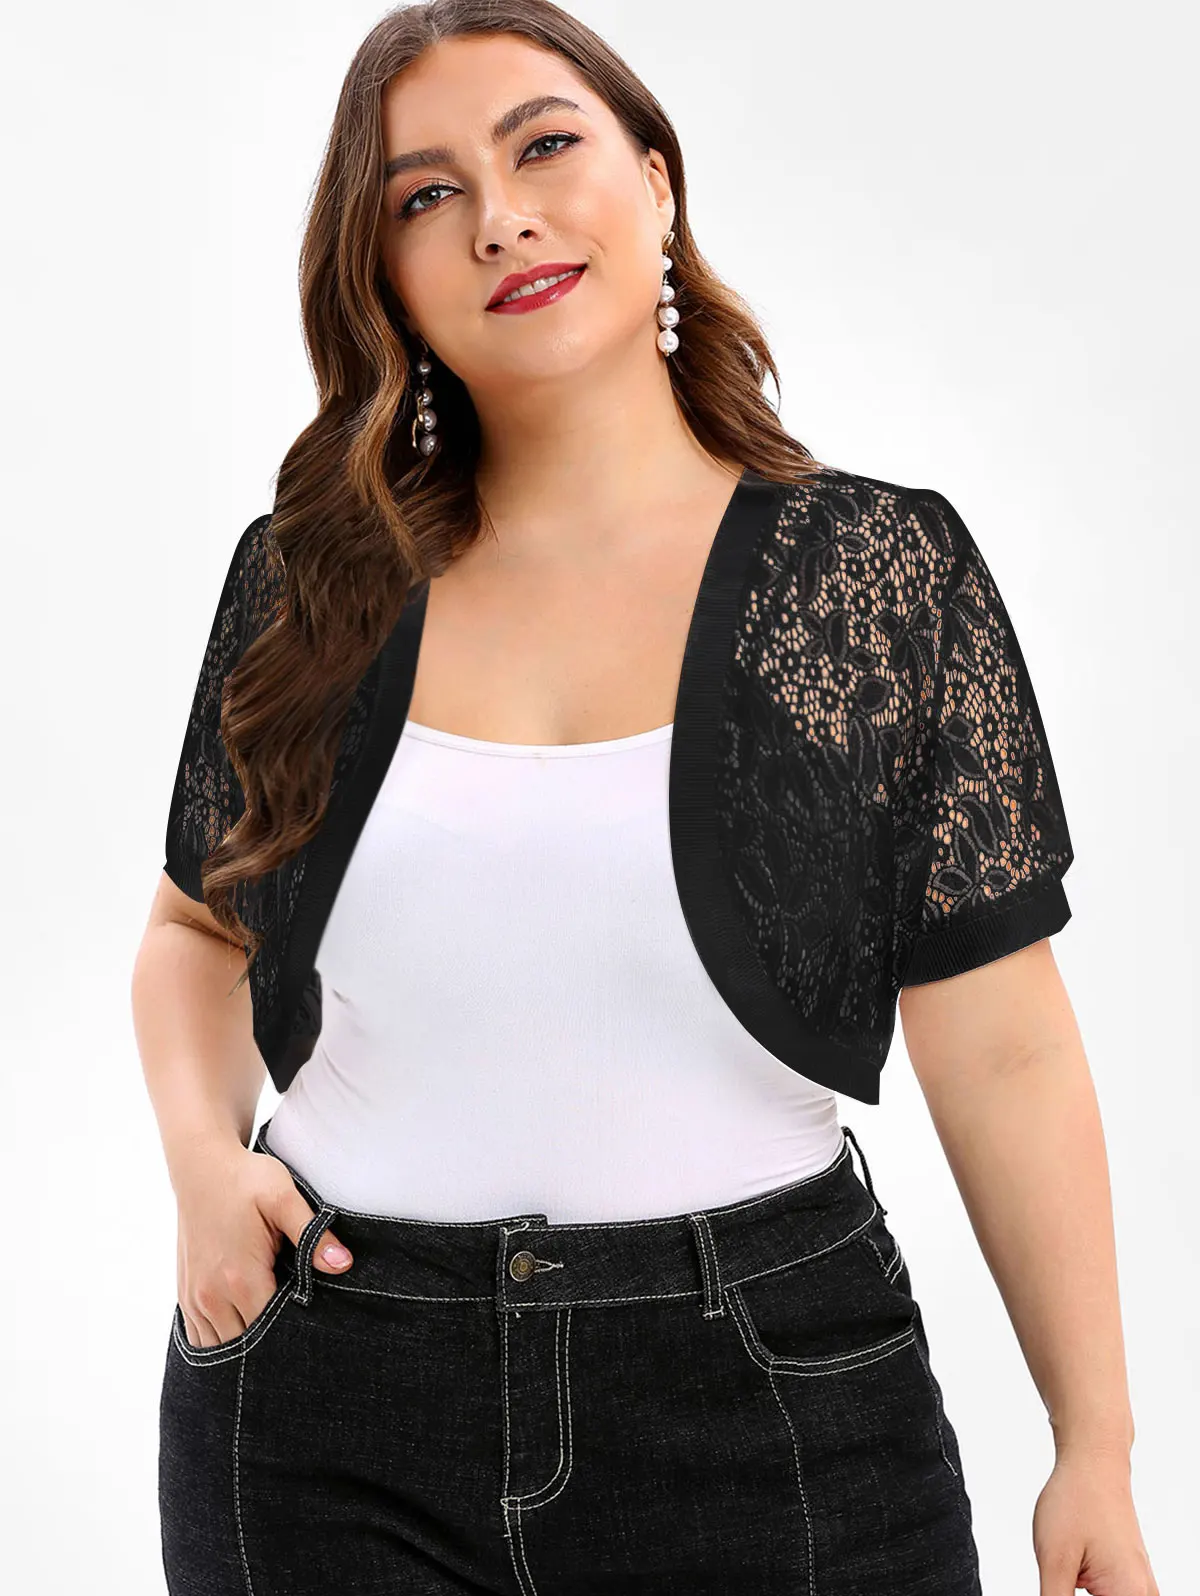 

Wipalo Plus Size Open Front Lace Panel Crop Top New Fashion 2019 Short Sleeve Solid Women Tops Tees Collarless Ladies 7 Colors